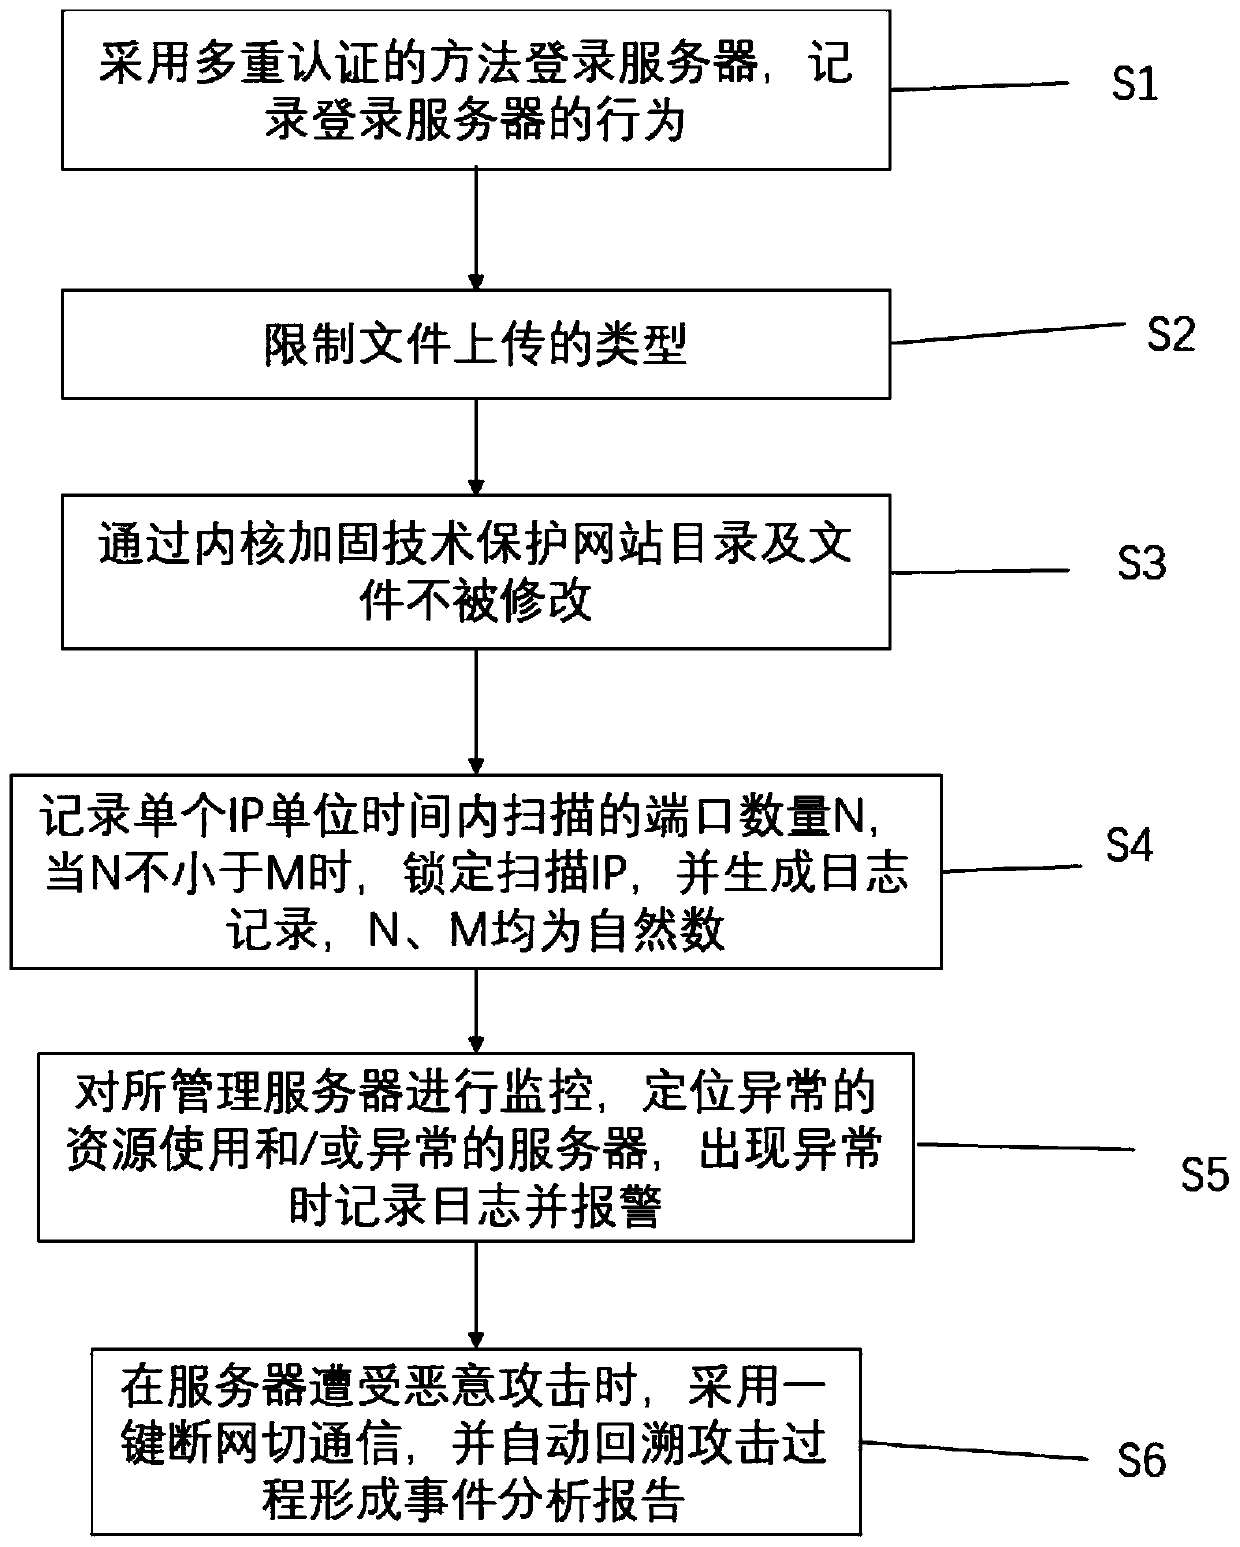 Network information security protection method and system